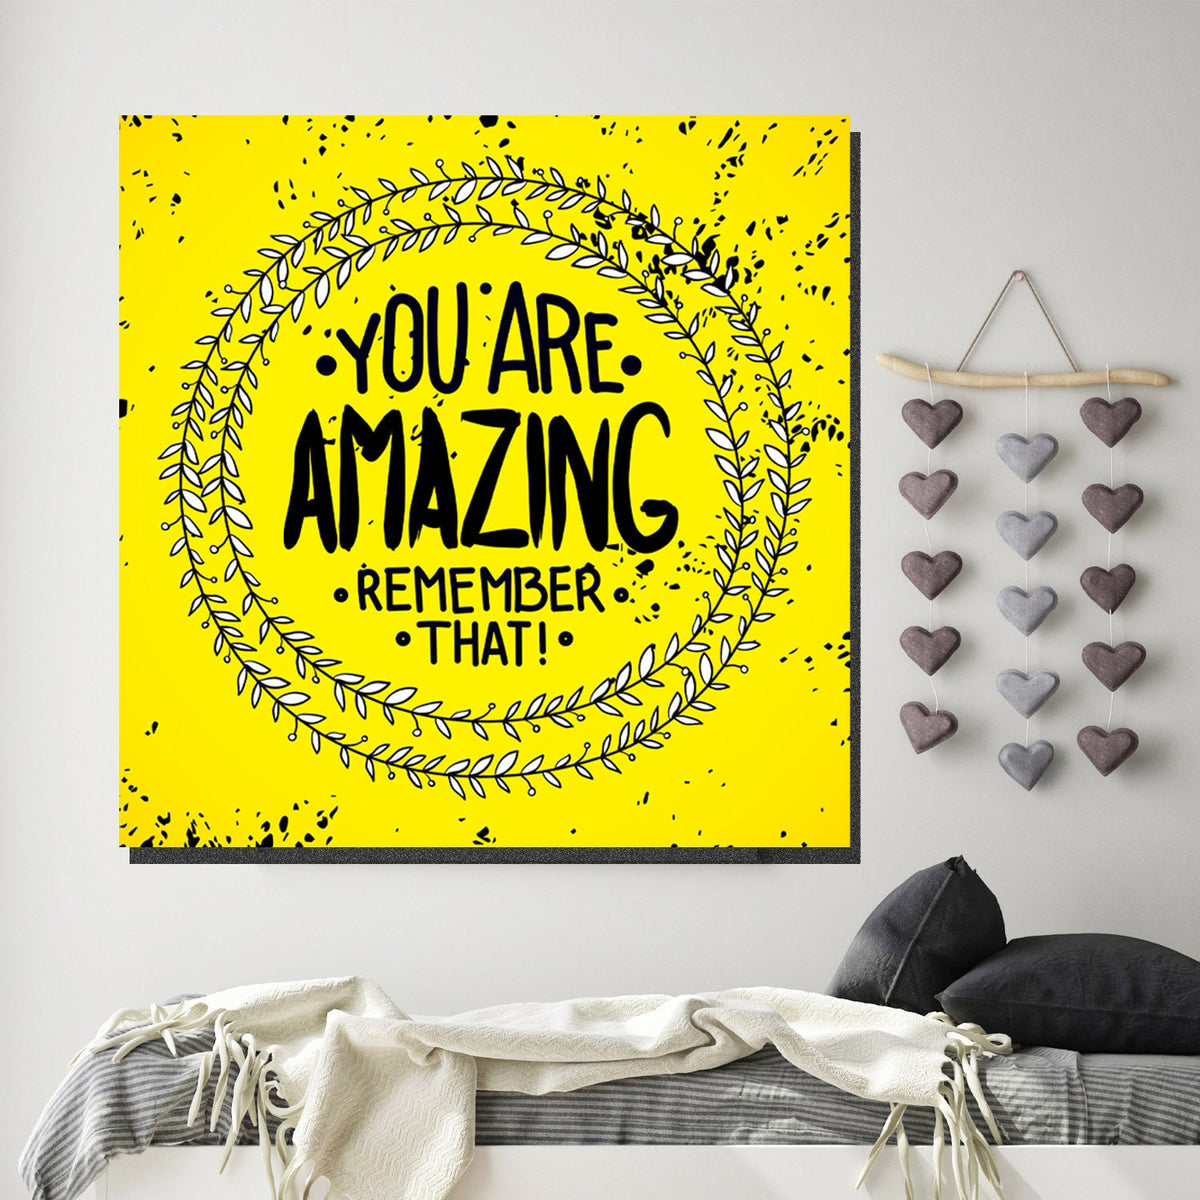 https://cdn.shopify.com/s/files/1/0387/9986/8044/products/YouAreAmazingCanvasArtprintStretched-4.jpg